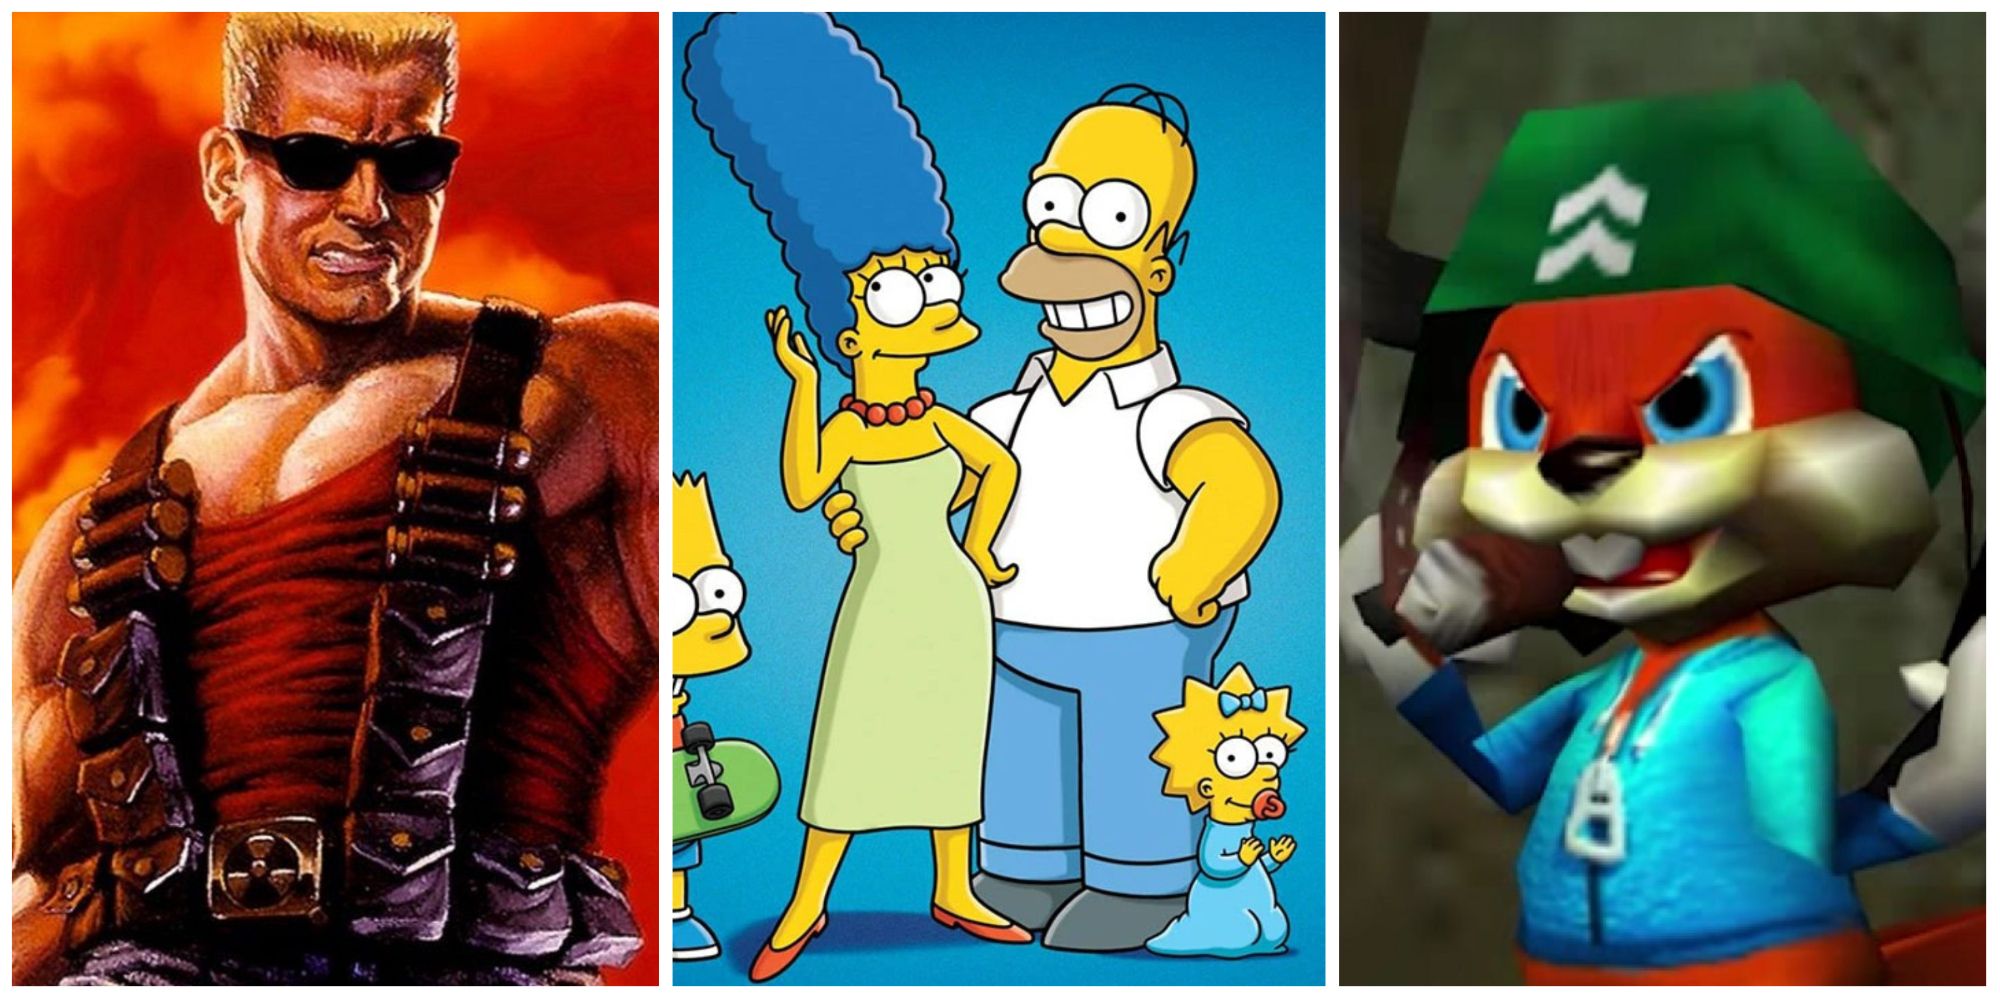 Great Games For Fans Of The Simpsons (That Are Not Part Of The Franchise)